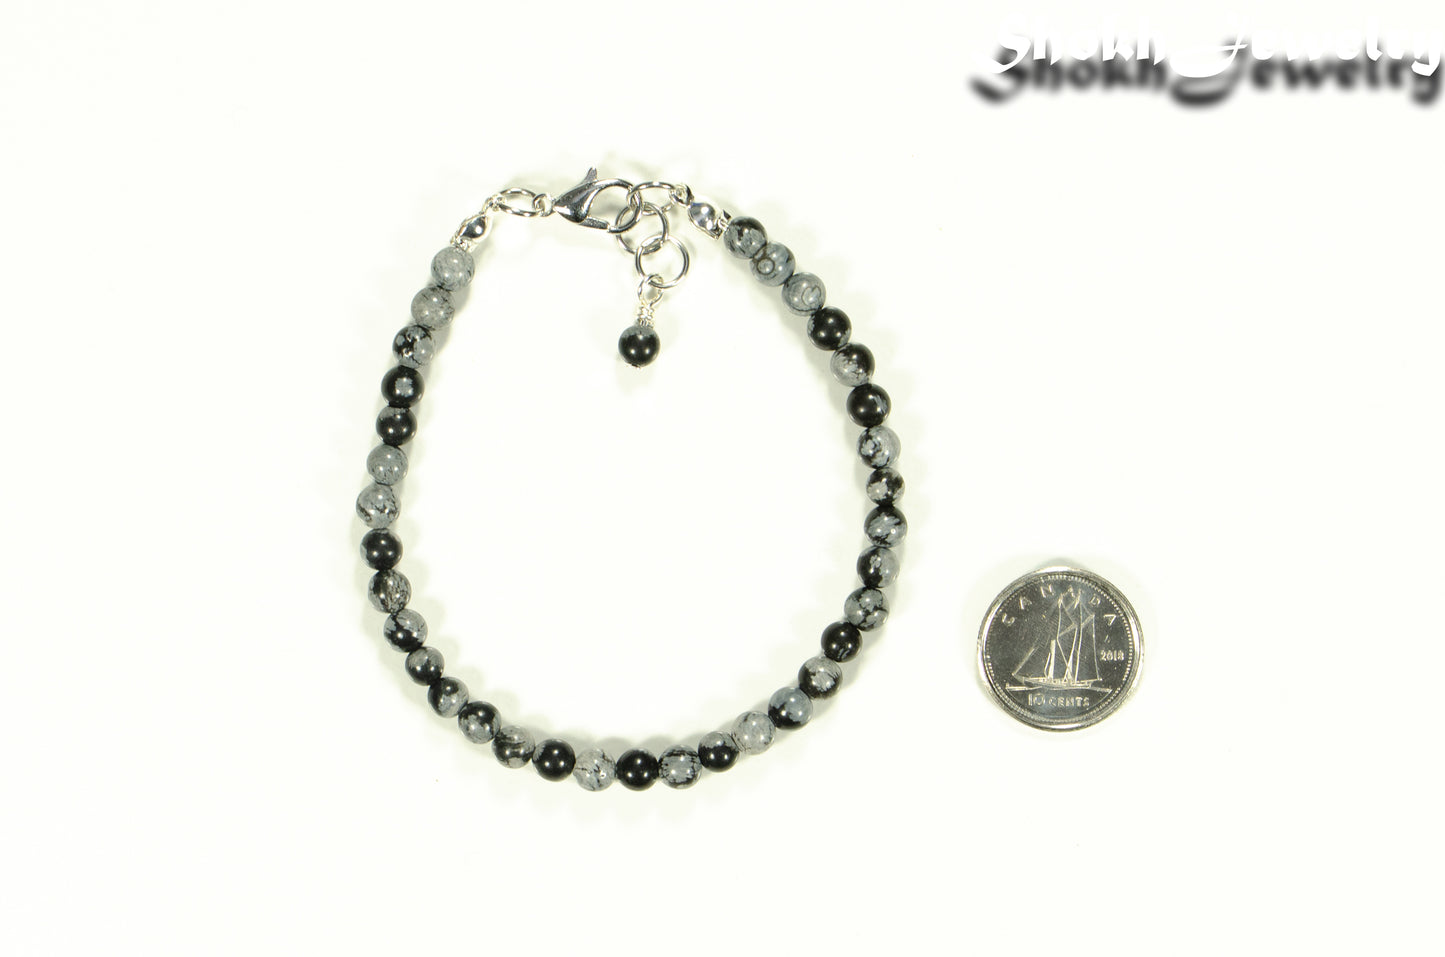 4mm Snowflake Obsidian Stone Bracelet with Clasp beside a dime.